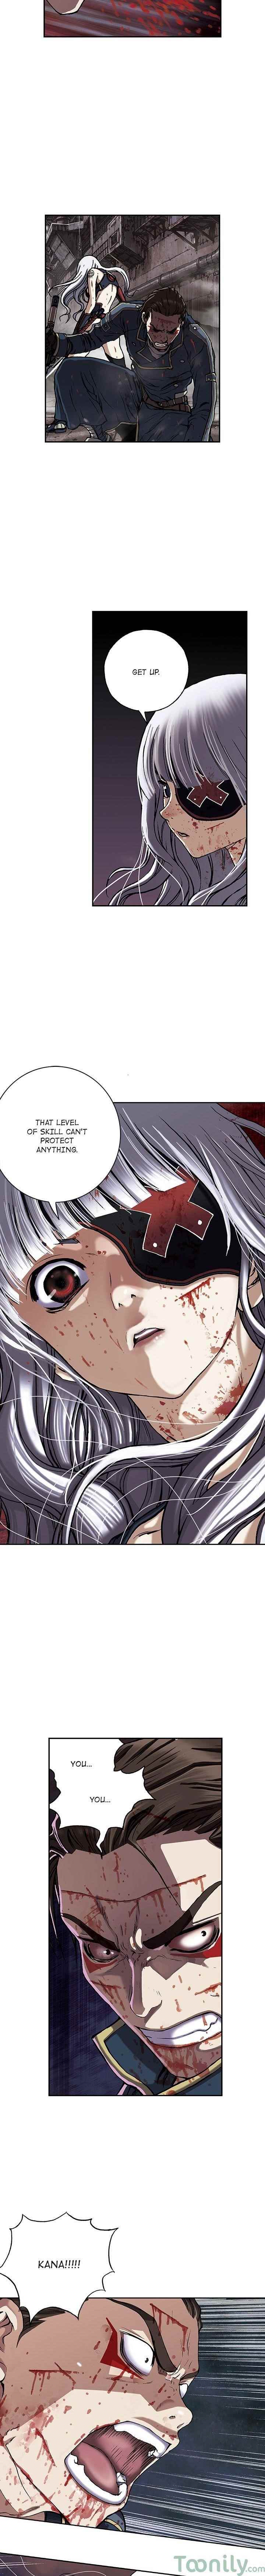 Leviathan Chapter 40 scans online, Read Leviathan Chapter 40 in english, read Leviathan Chapter 40 for free, Leviathan Chapter 40 void scans, Leviathan Chapter 40 void scans, , Leviathan Chapter 40 at void scans